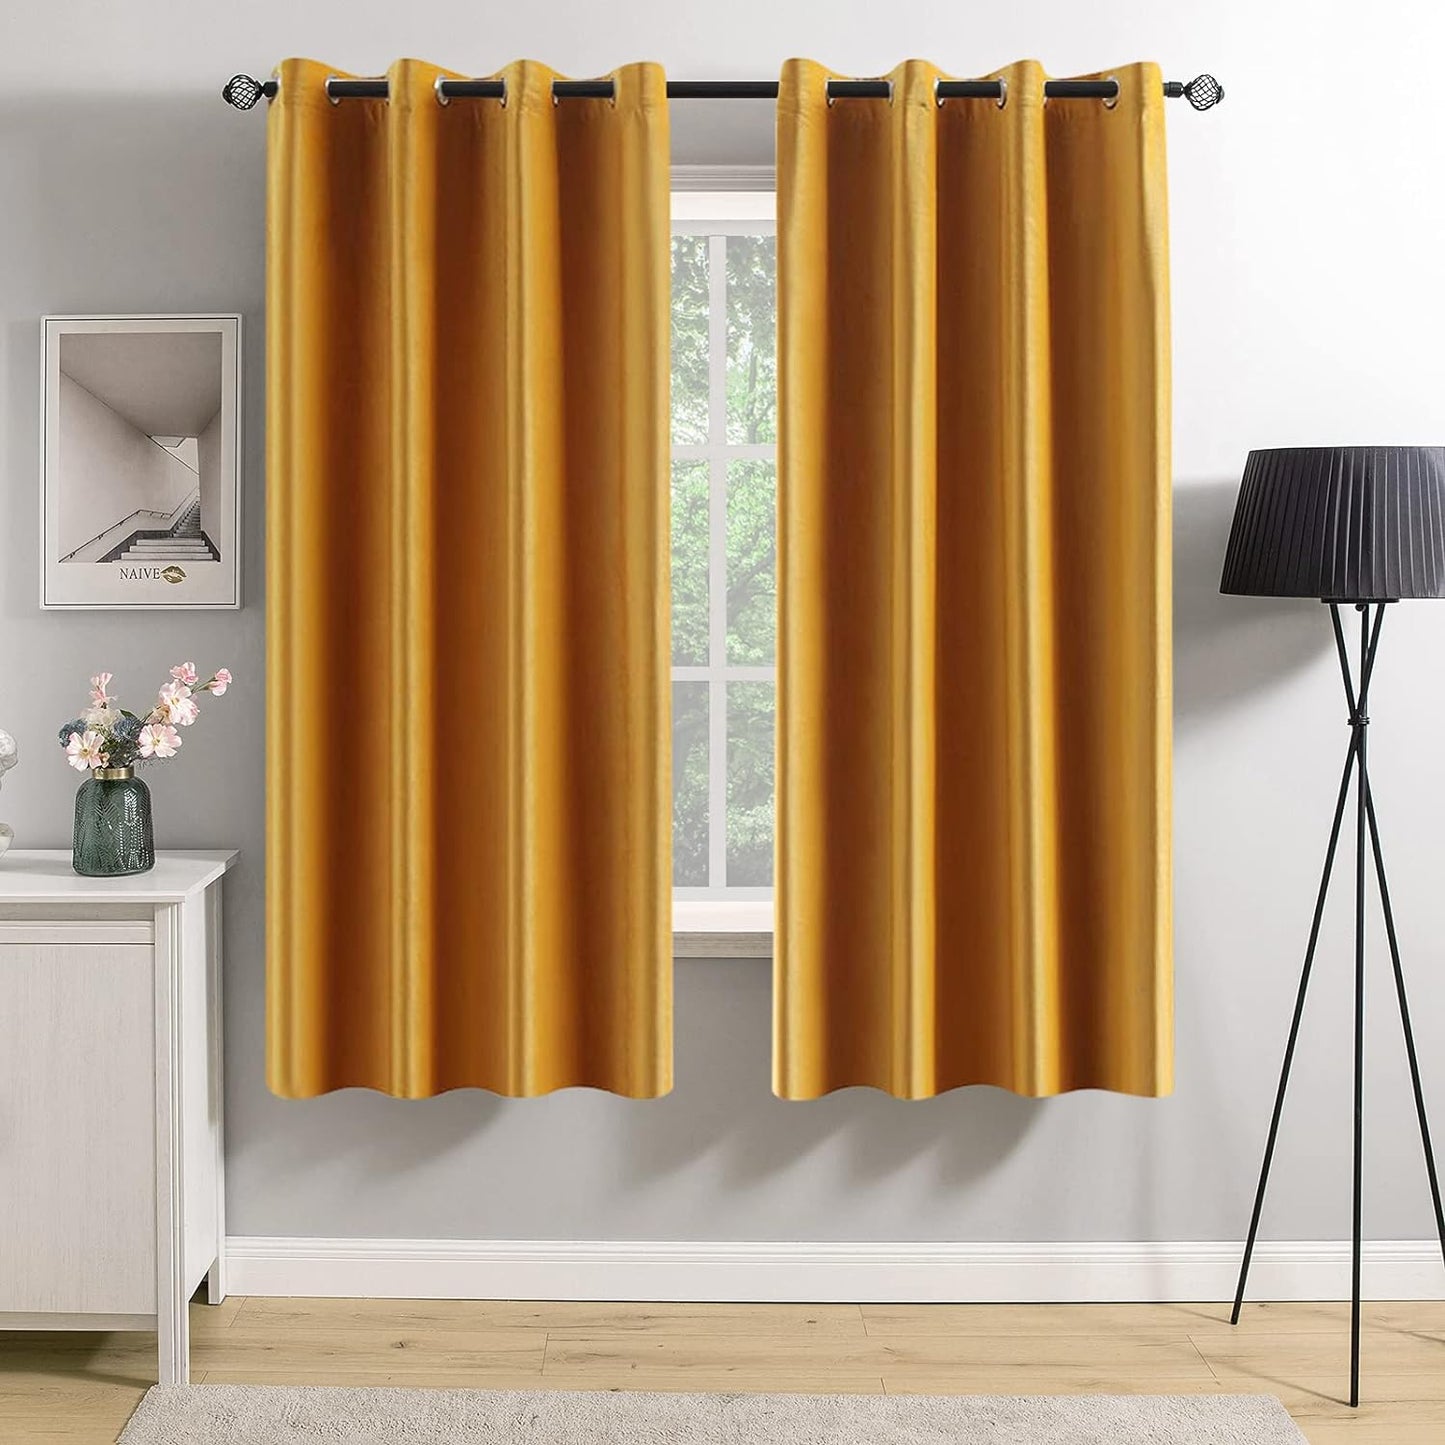 MIULEE Velvet Curtains Olive Green Elegant Grommet Curtains Thermal Insulated Soundproof Room Darkening Curtains/Drapes for Classical Living Room Bedroom Decor 52 X 84 Inch Set of 2  MIULEE Mustard Yellow W52 X L63 